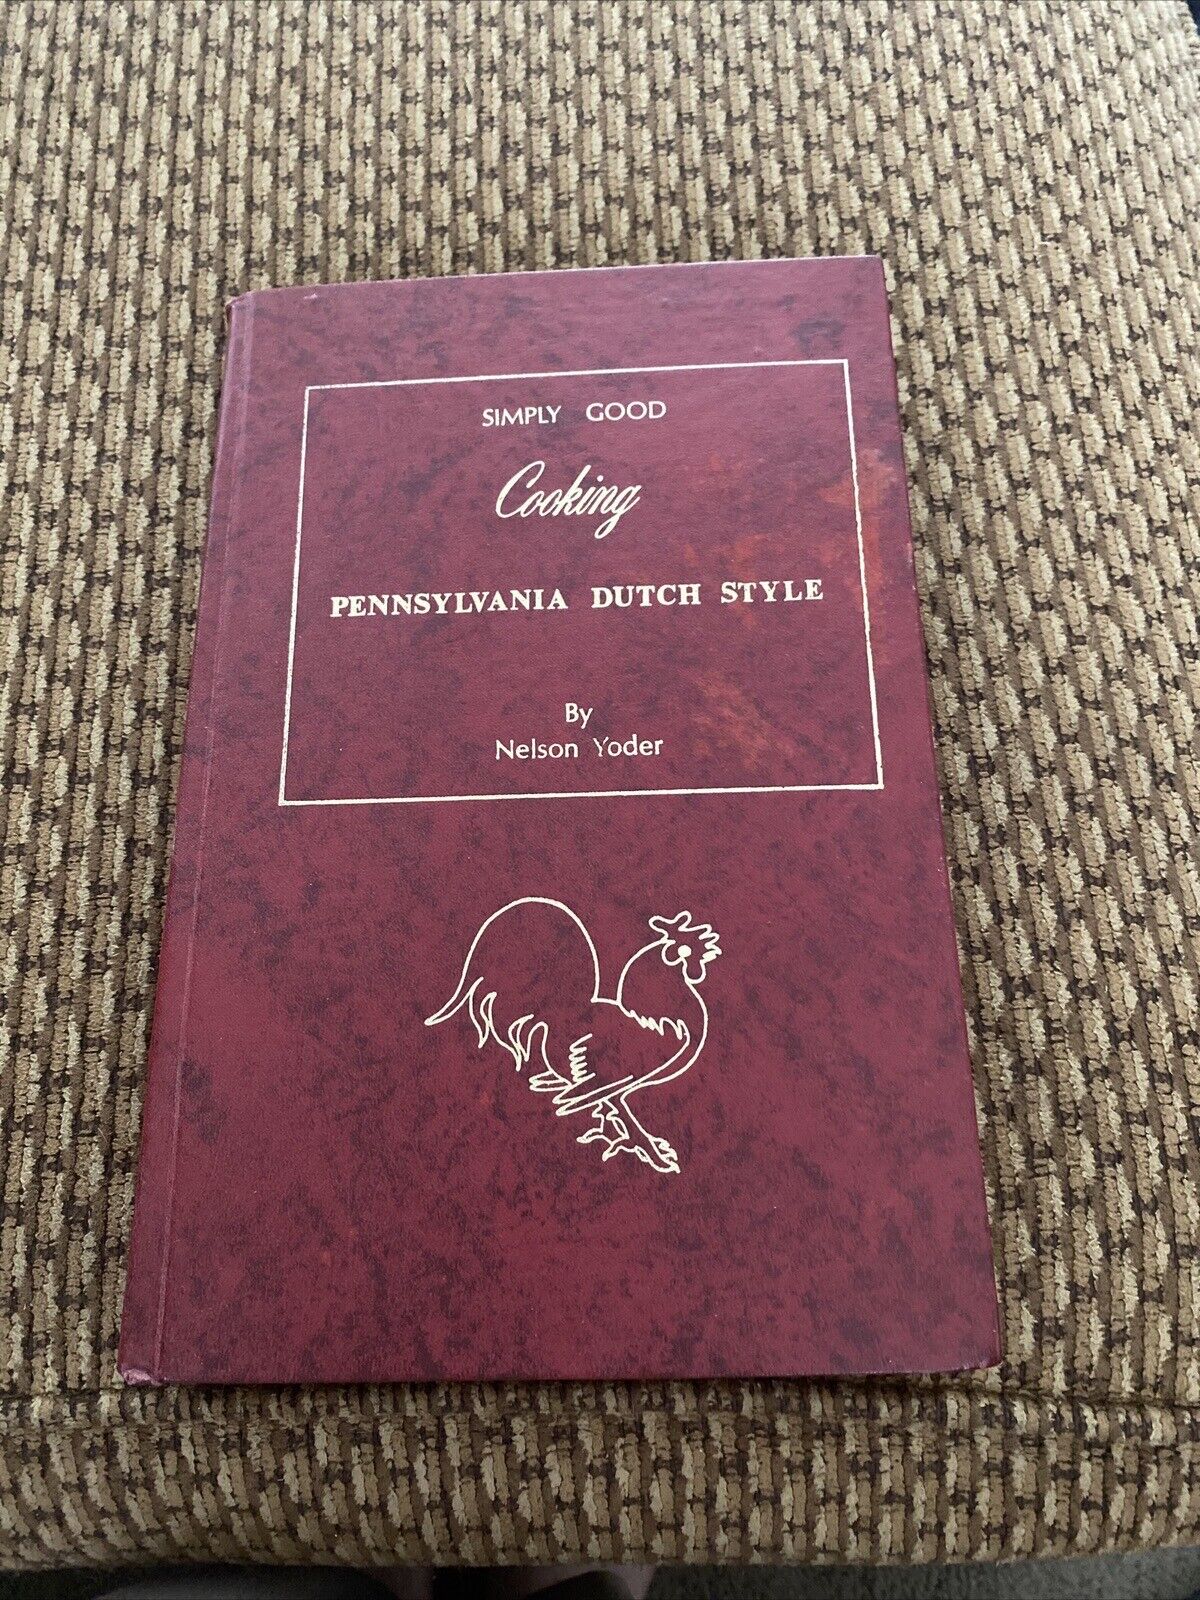 1977 Signed Simply Good: Cooking Pennsylvania Dutch Sty/Nelson Yoder 1st Edition